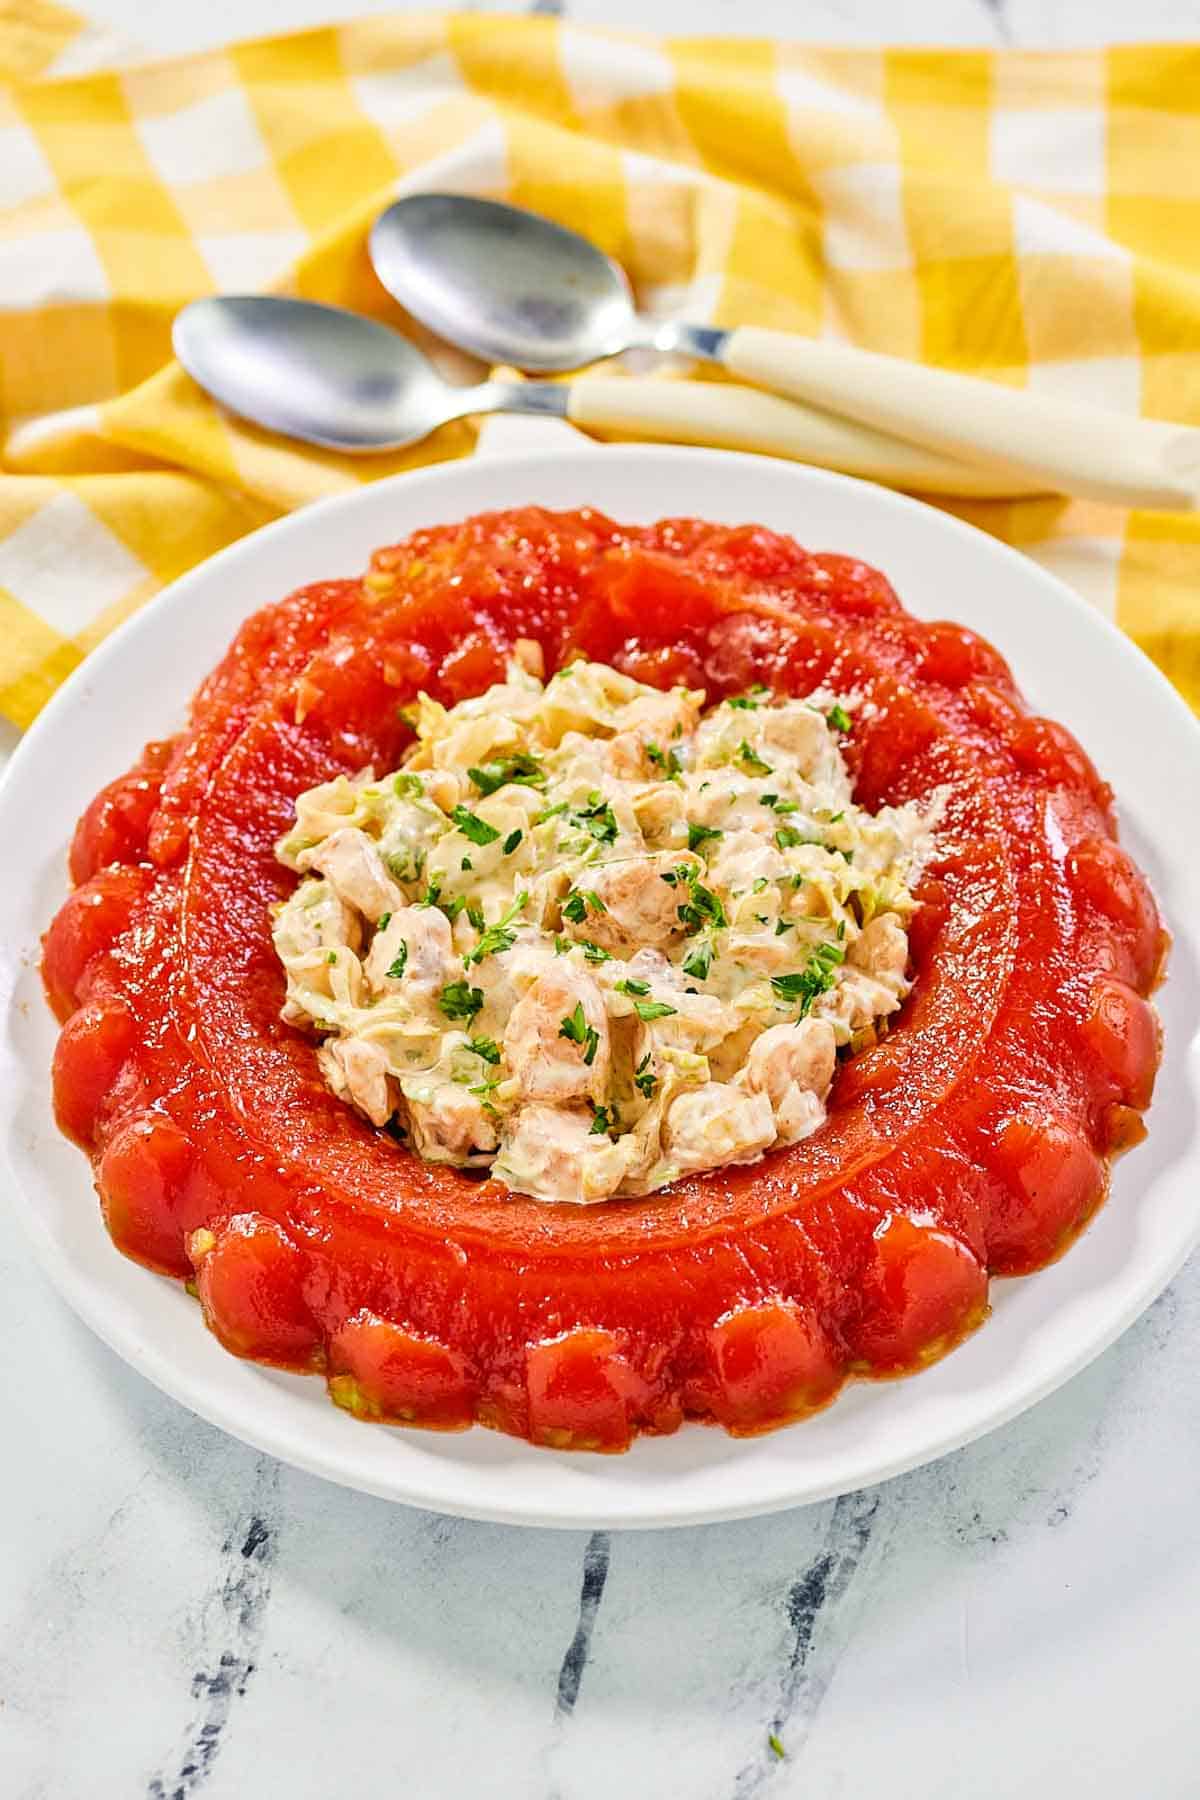 Tomato aspic with shrimp salad in the center on a large round platter.